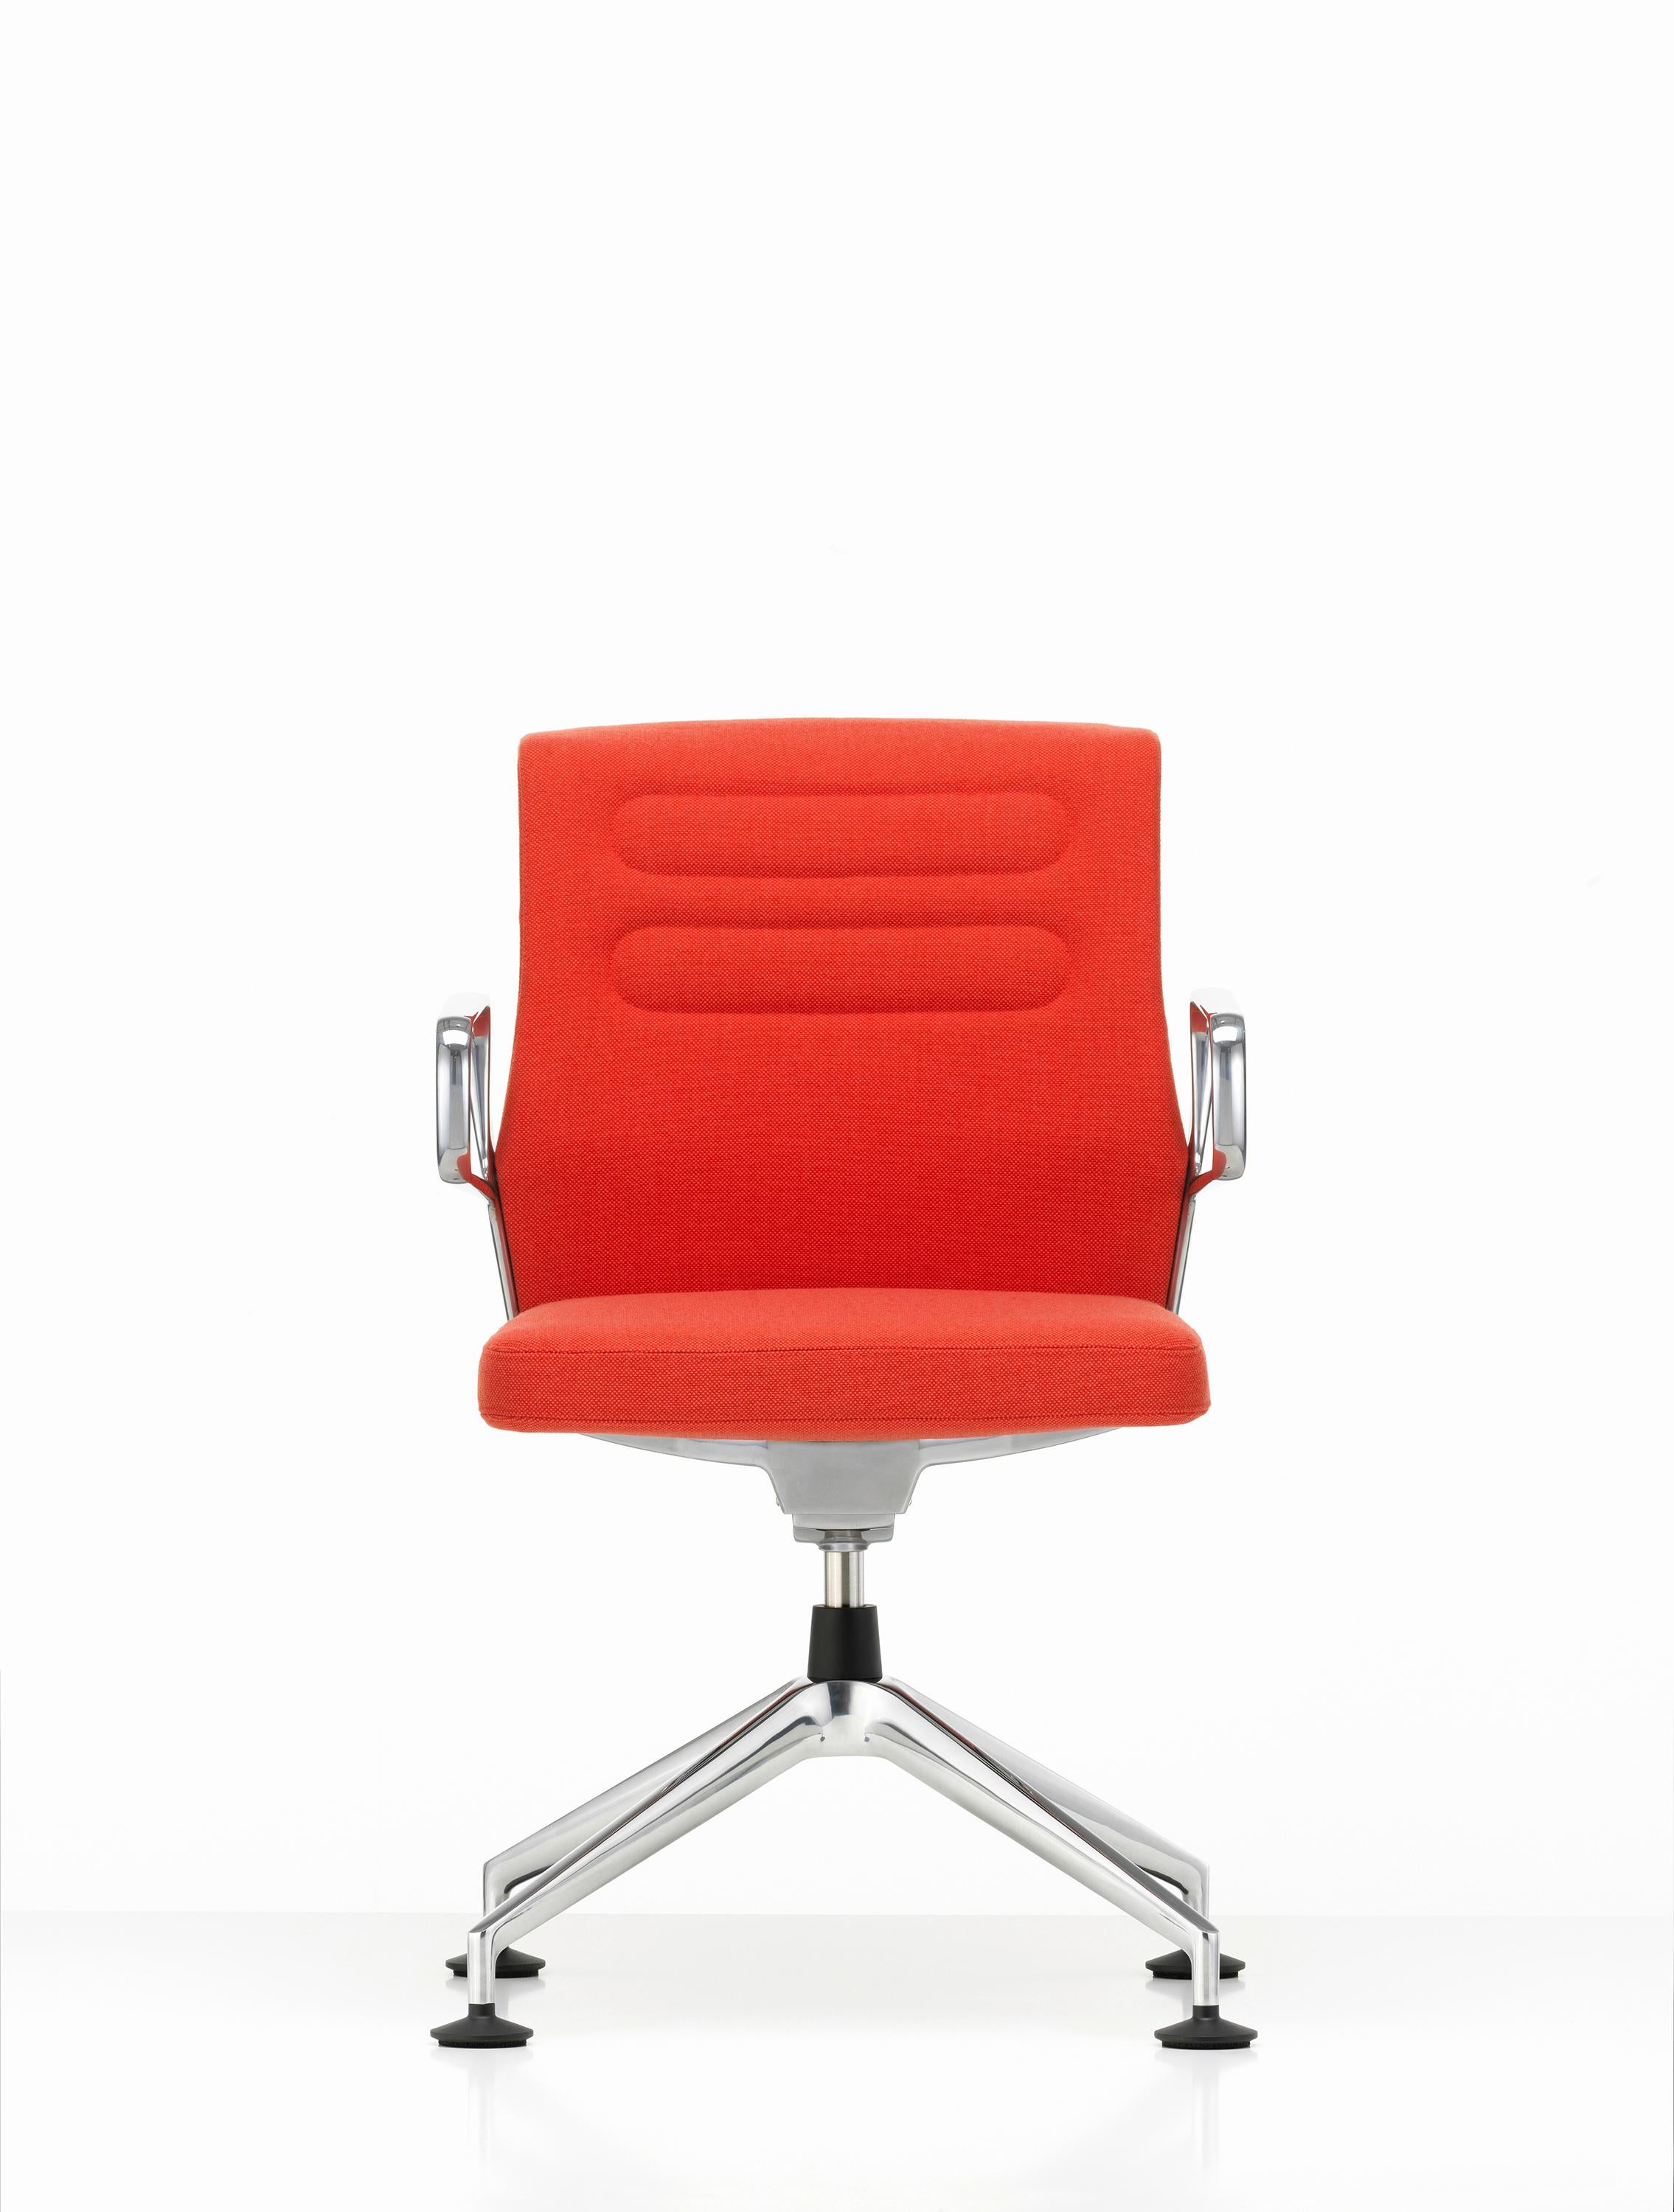 These items are currently only available in the United States.

AC 5 Meet is the Classic conference chair in the AC 5 Group office chair family. Thanks to an understated elegant design and use of high-quality materials, it cuts a fine figure in both